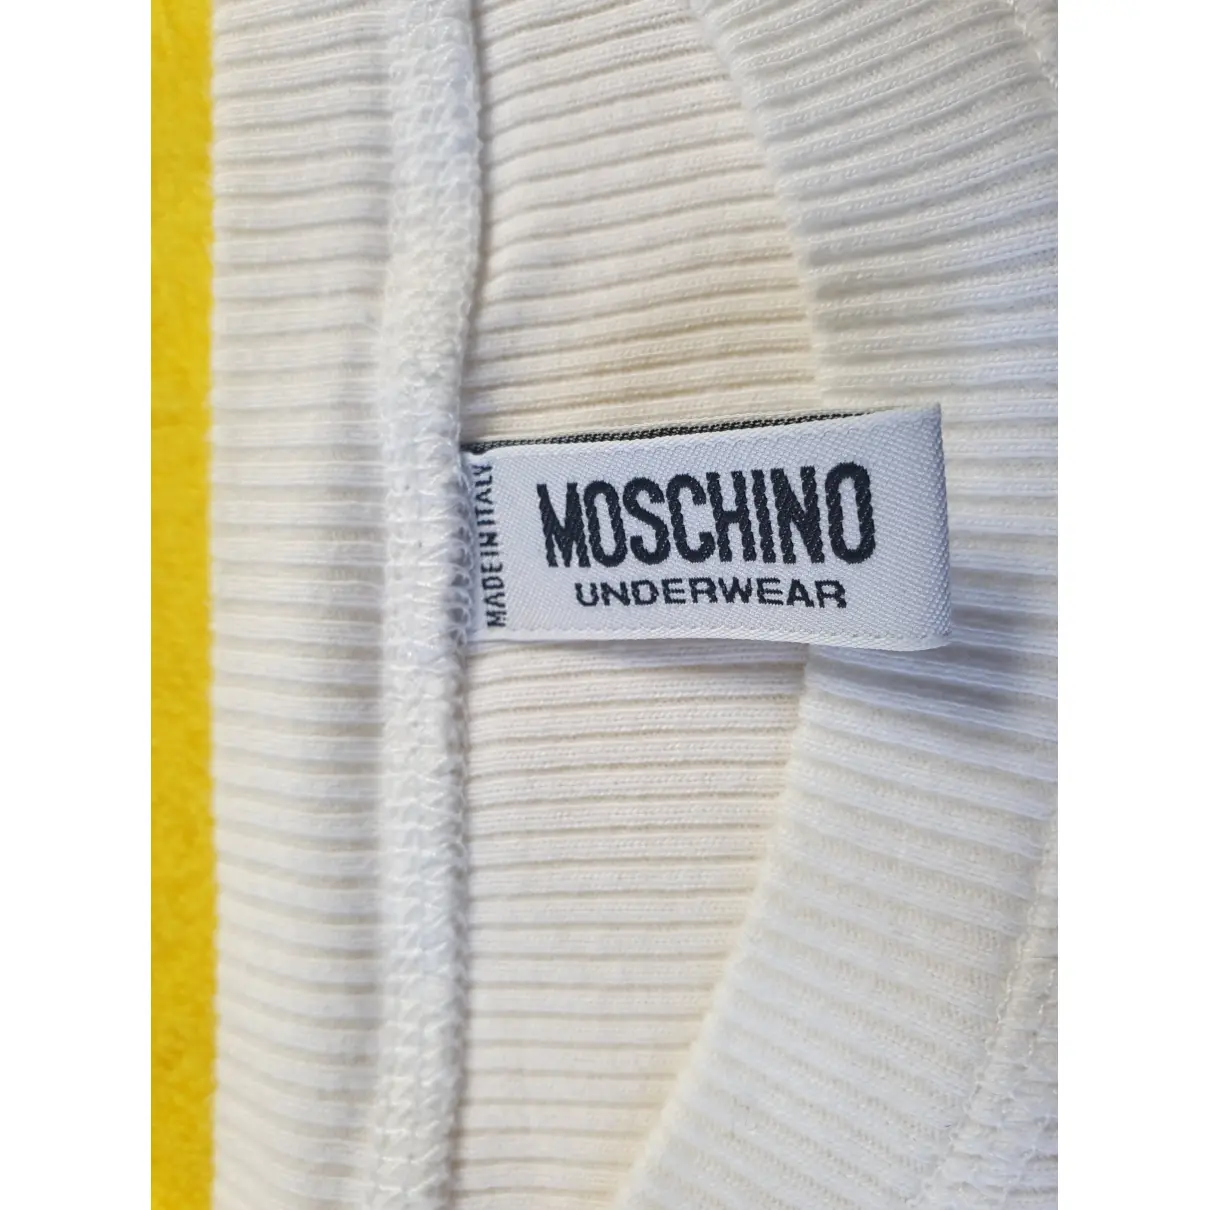 Buy Moschino T-shirt online - Vintage